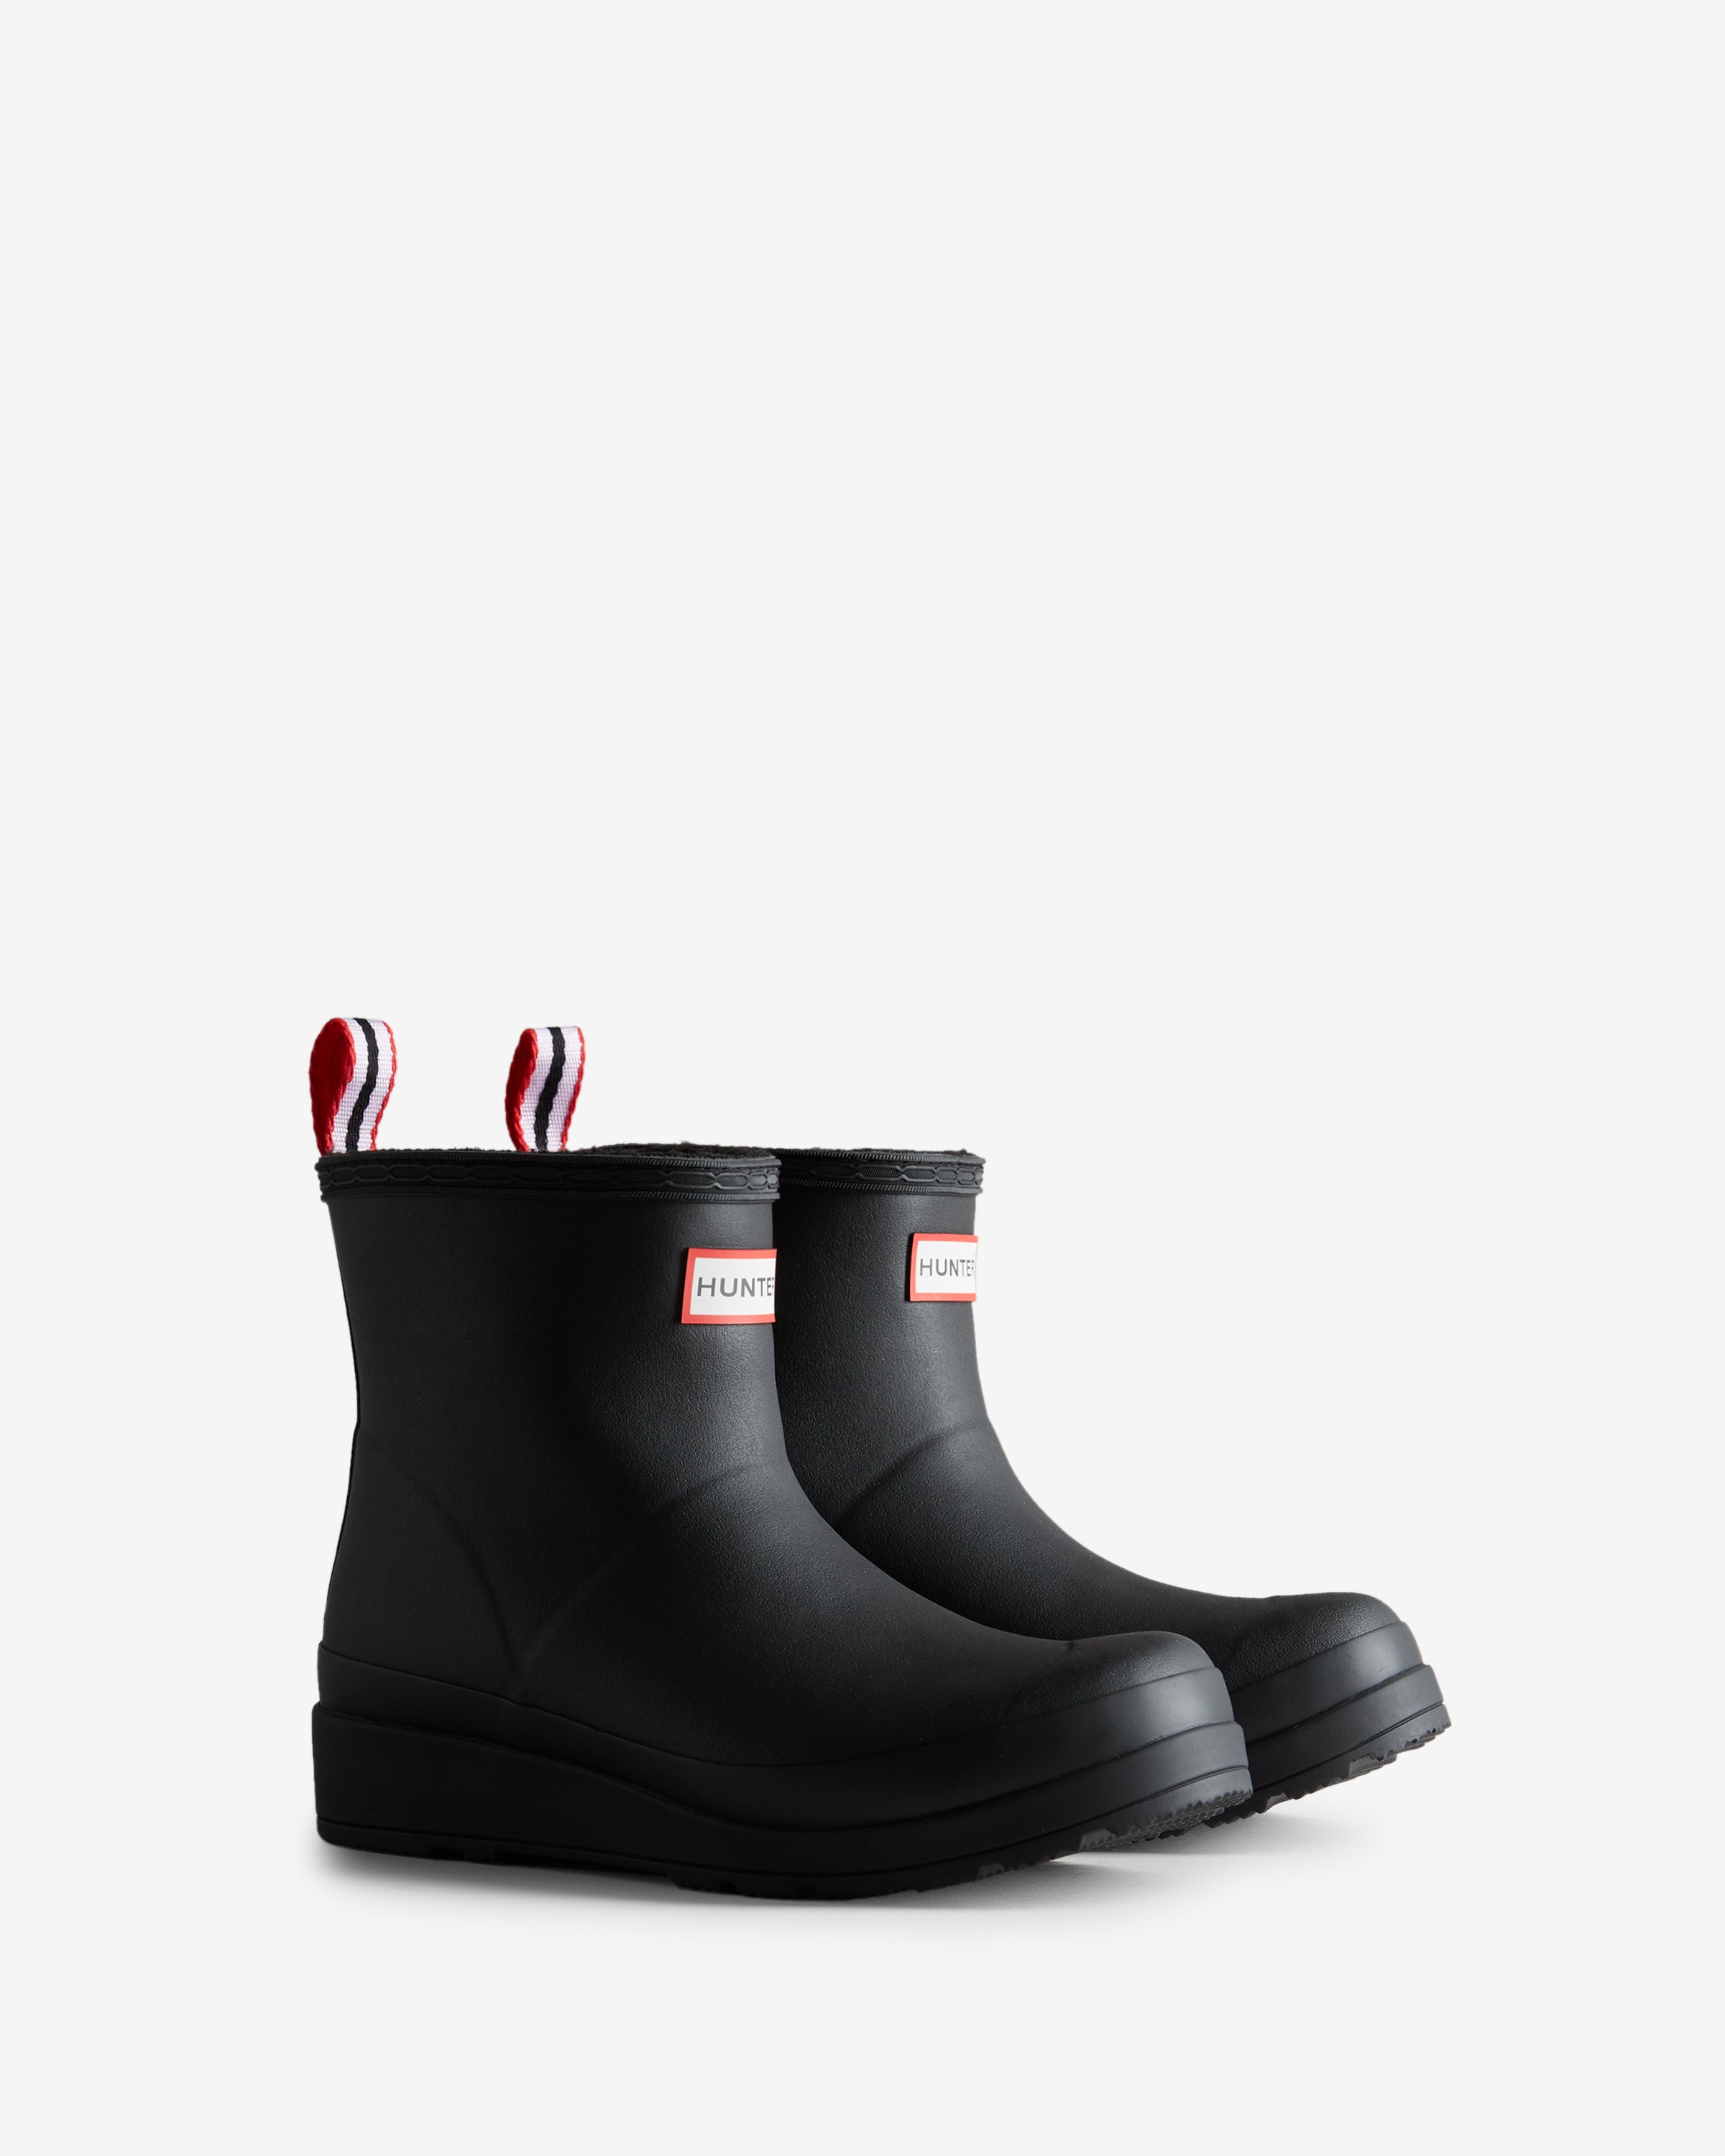 Play Boot – Hunter Boots UK